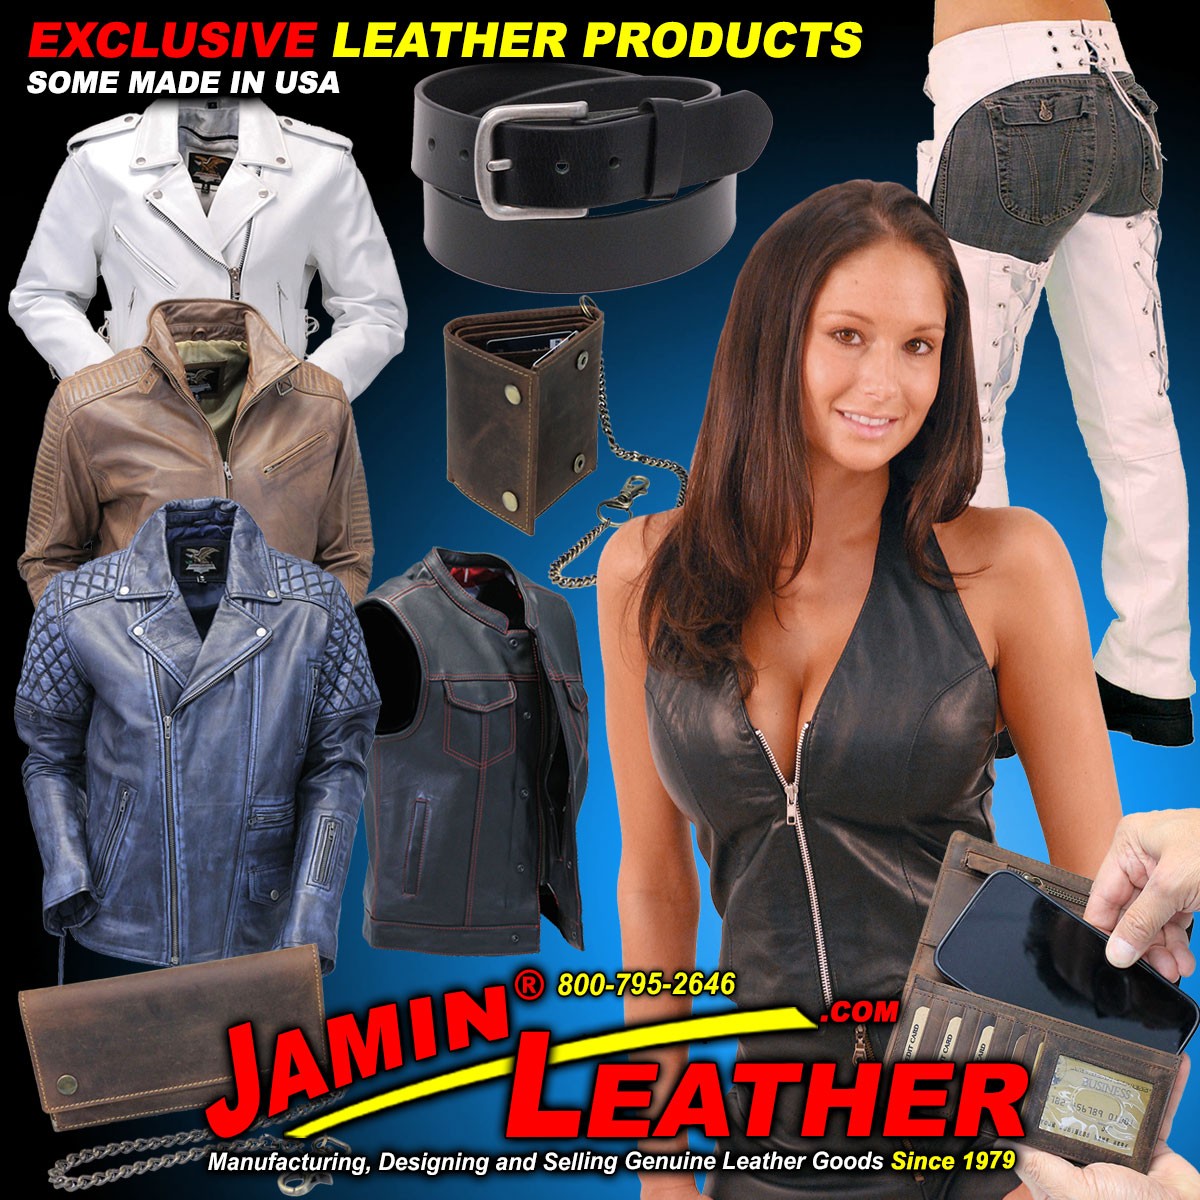 JAMIN LEATHER EXCLUSIVE PRODUCTS